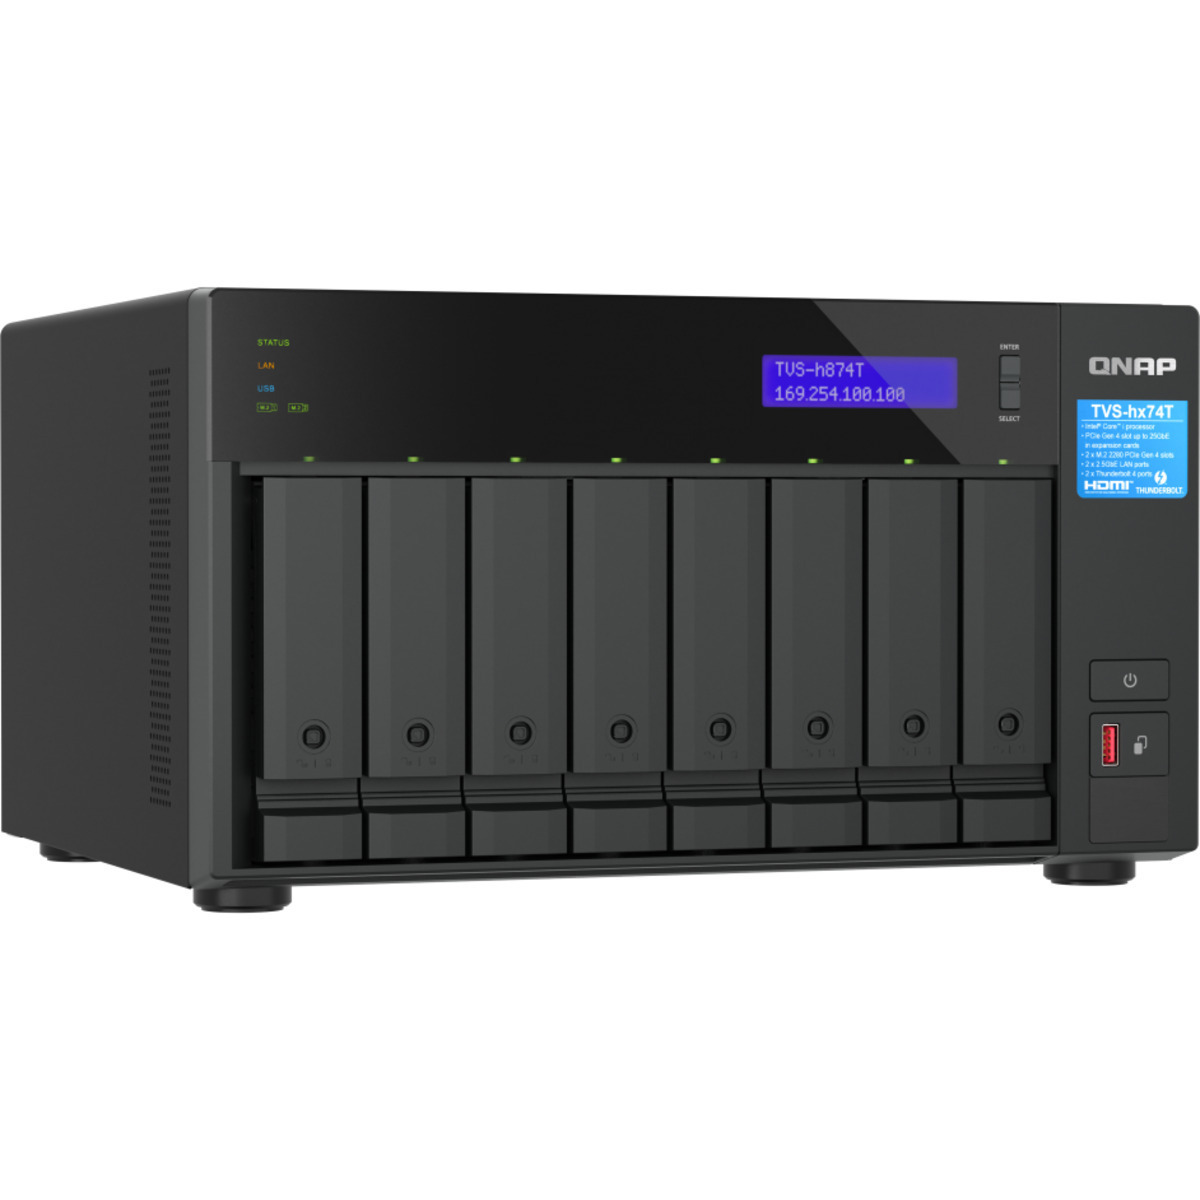 buy QNAP TVS-h874T Core i9 Thunderbolt 4 176tb Desktop DAS-NAS - Combo Direct + Network Storage Device 8x22000gb Western Digital Red Pro WD221KFGX 3.5 7200rpm SATA 6Gb/s HDD NAS Class Drives Installed - Burn-In Tested - nas headquarters buy network attached storage server device das new raid-5 free shipping usa spring sale TVS-h874T Core i9 Thunderbolt 4